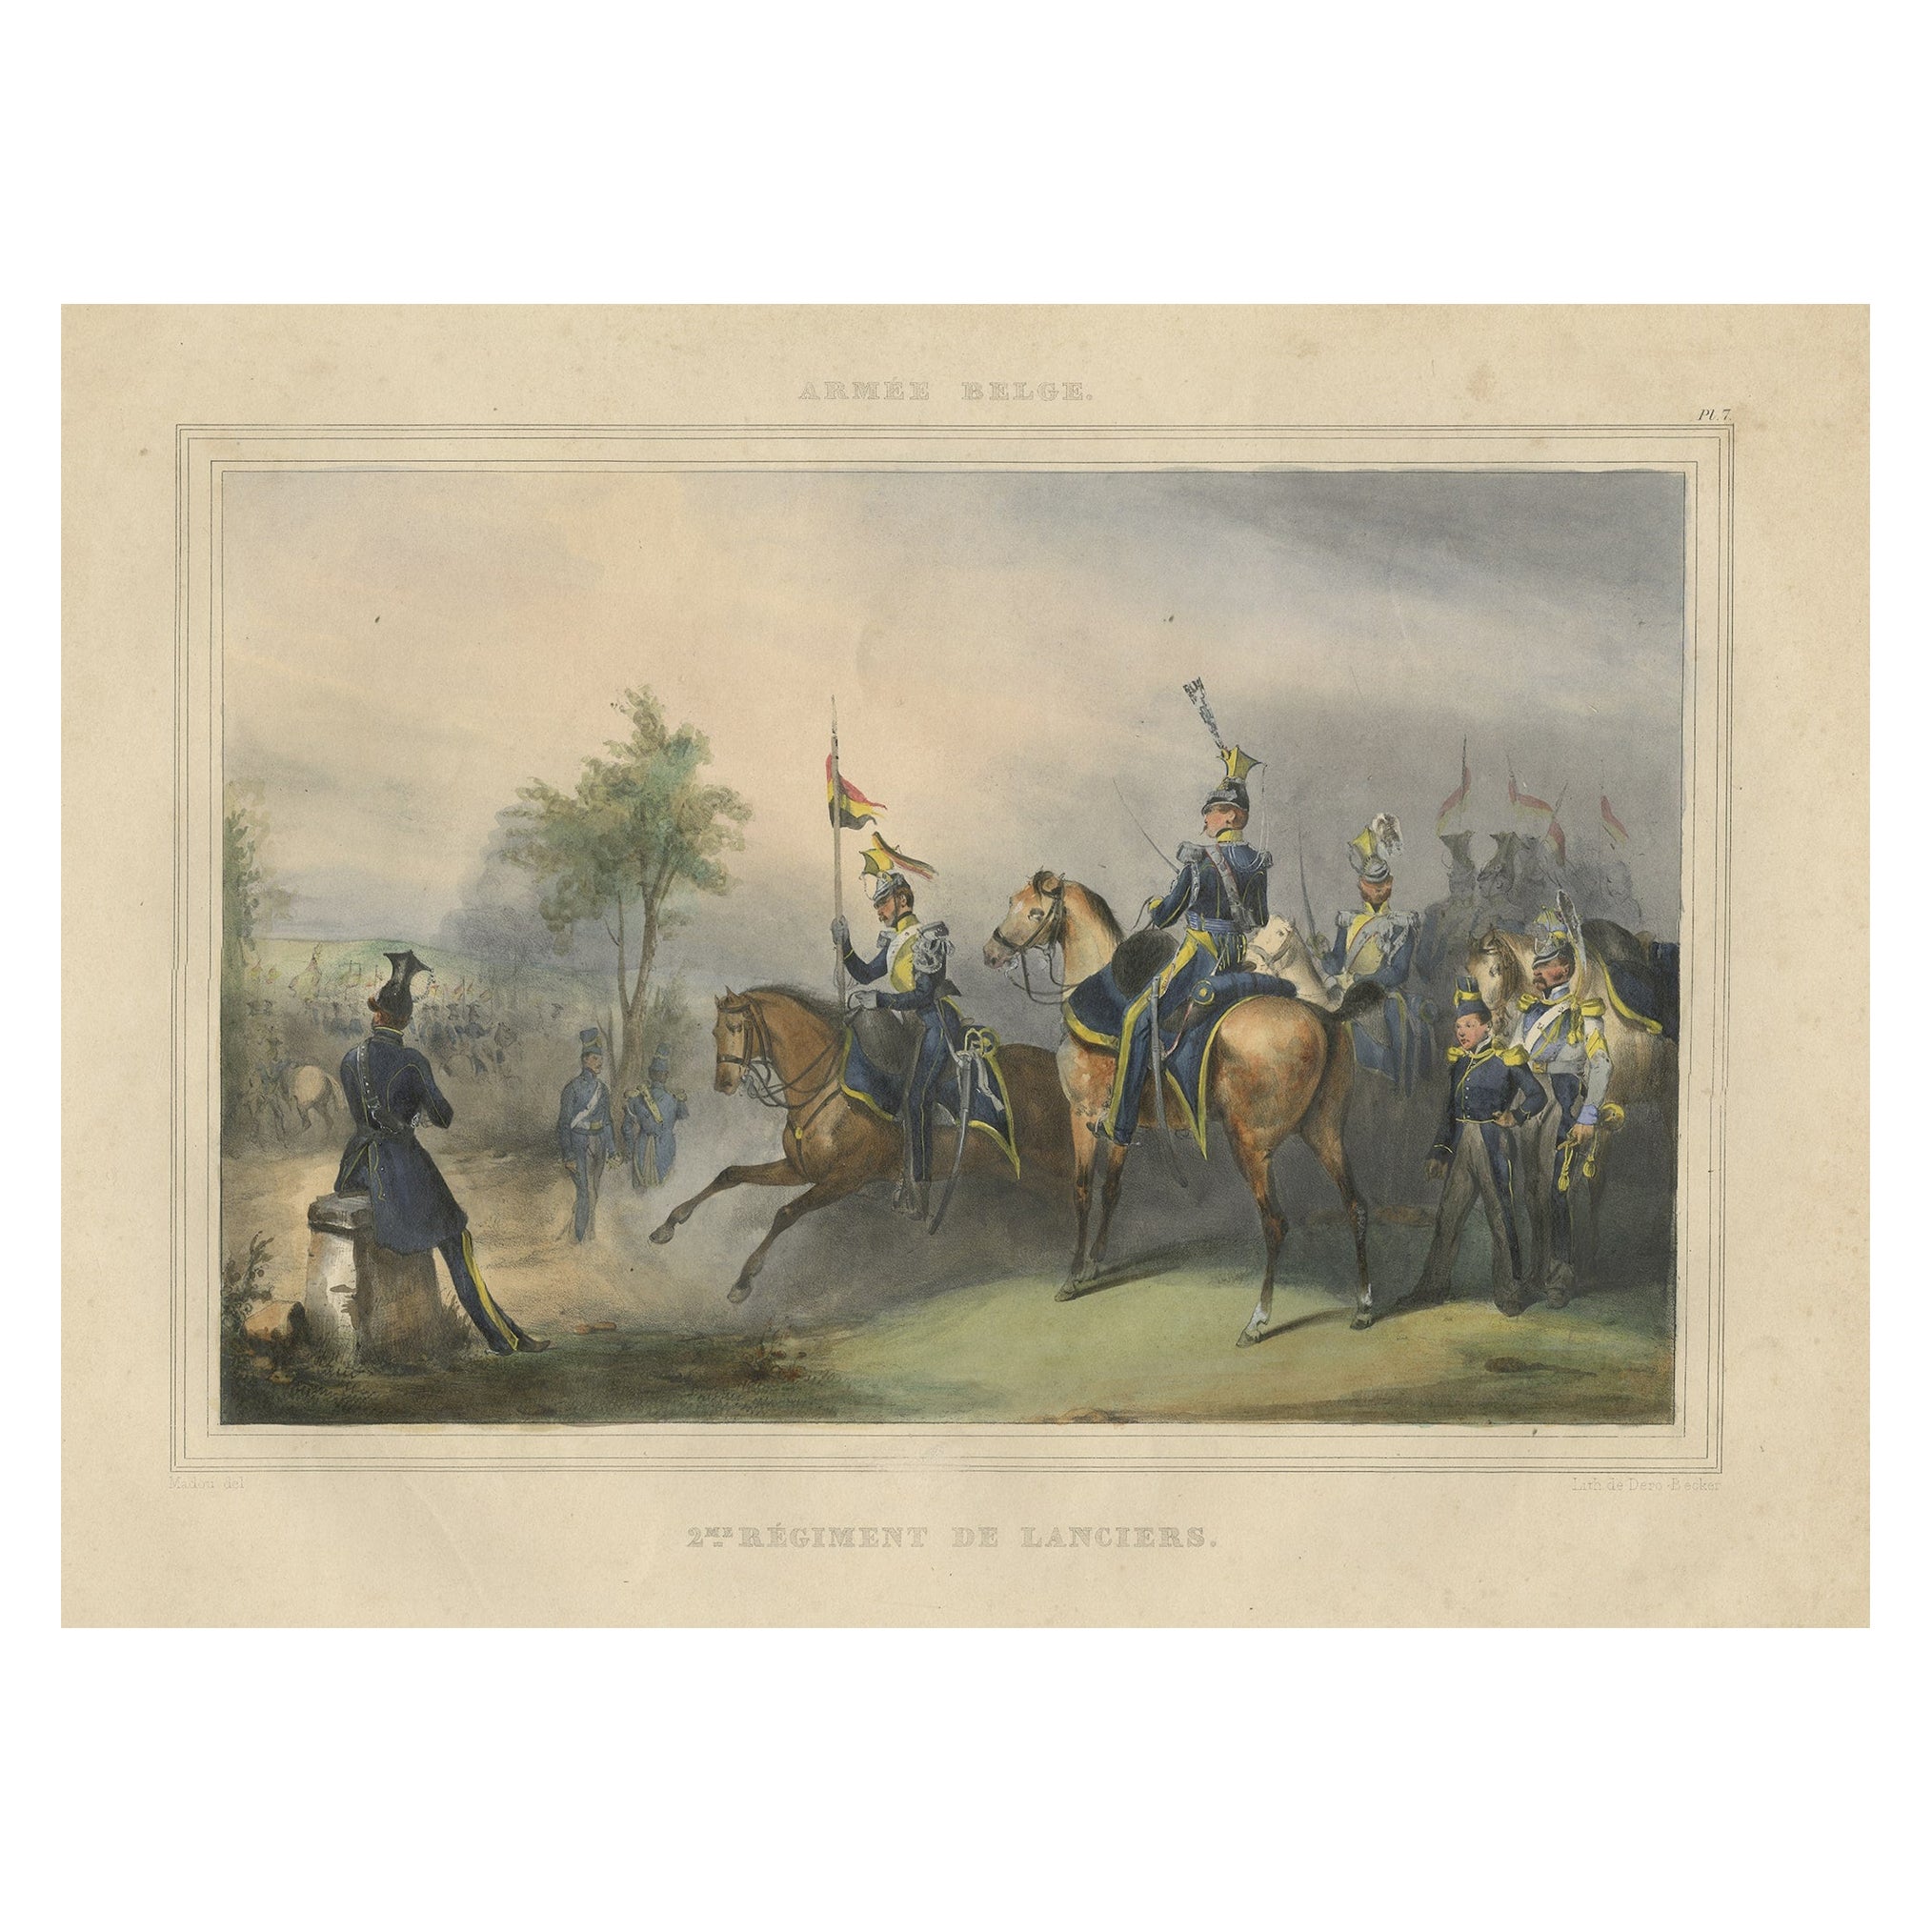 Nicely Hand-Colored Print of a Belgium Army Regiment Riding Horses, 1833